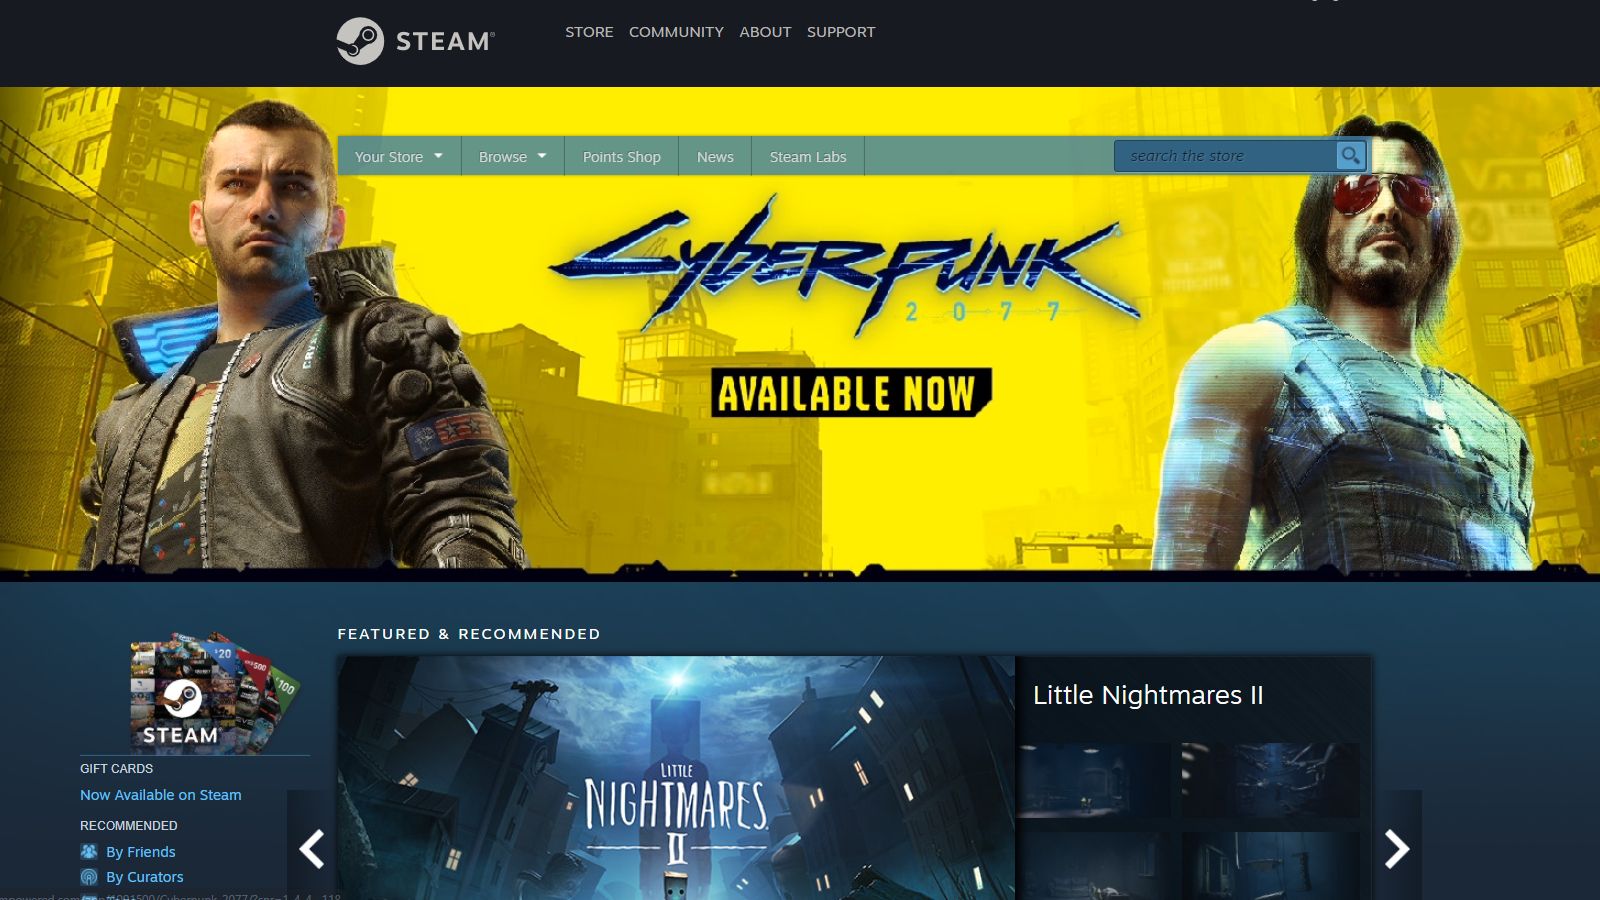 Screenshot of the Steam home page